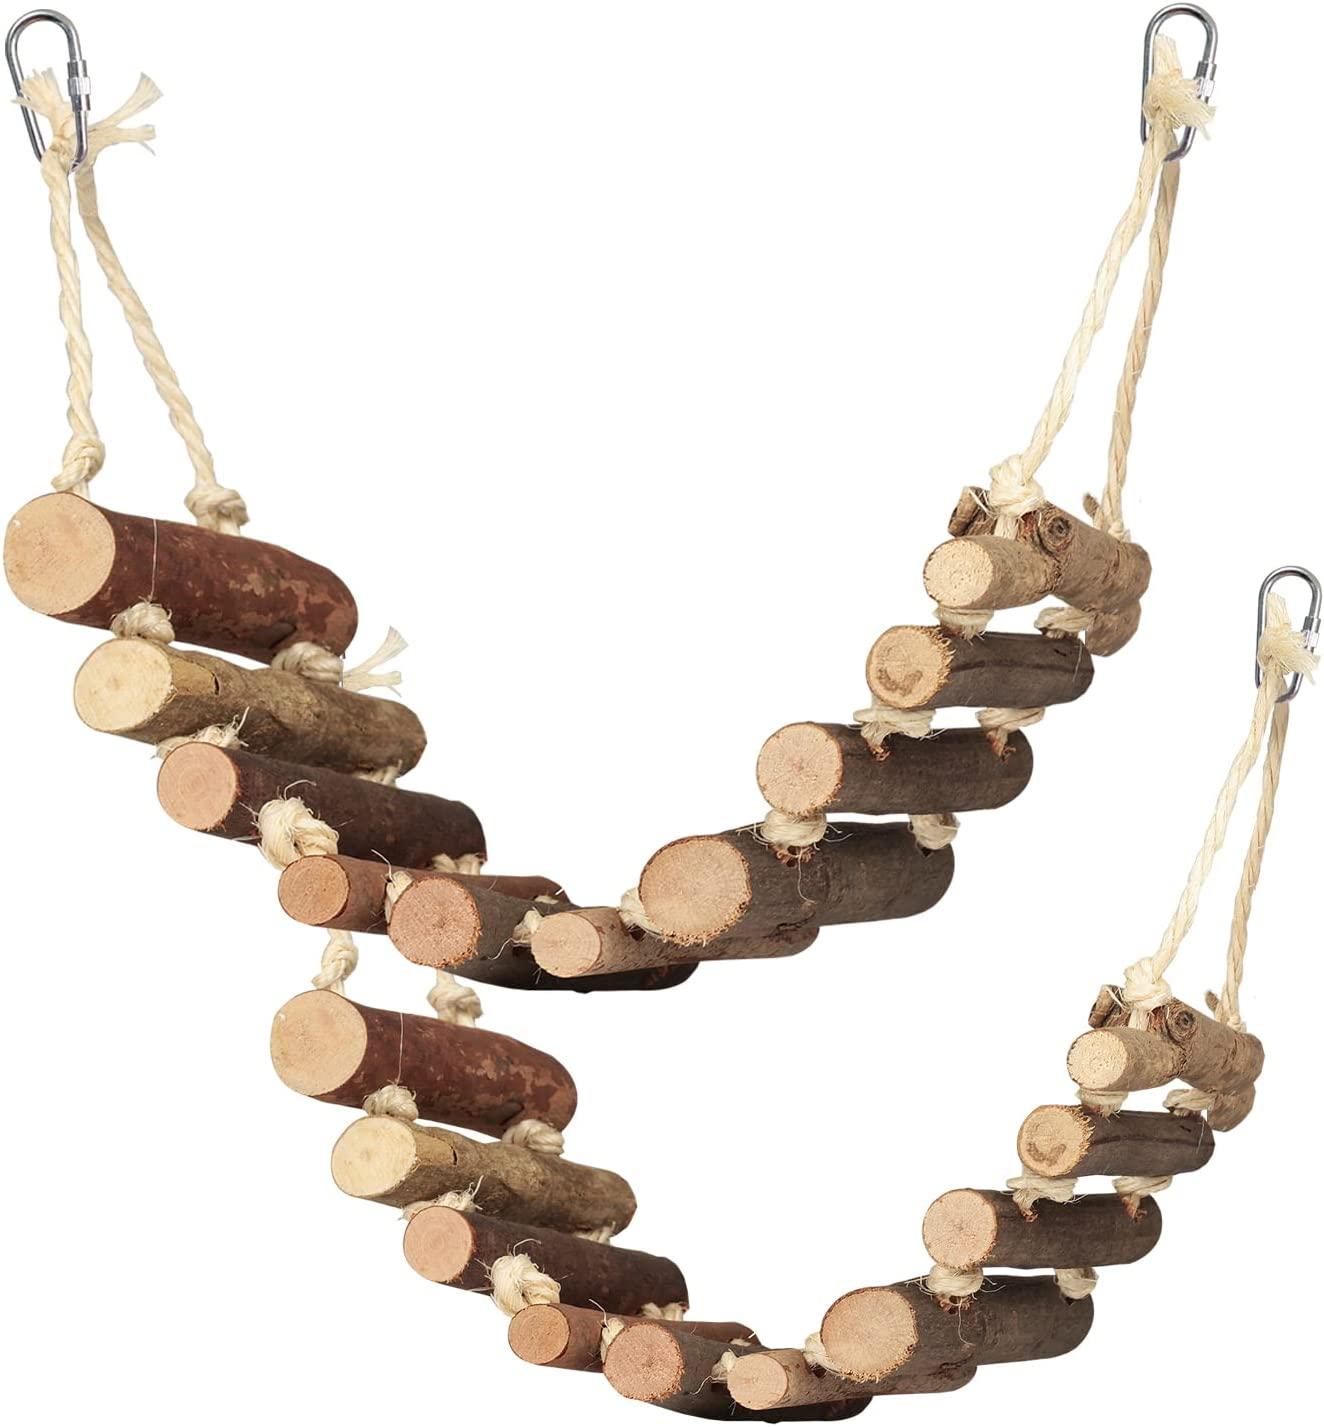 Rope Bird Ladder 62806 Prevue Pet Products